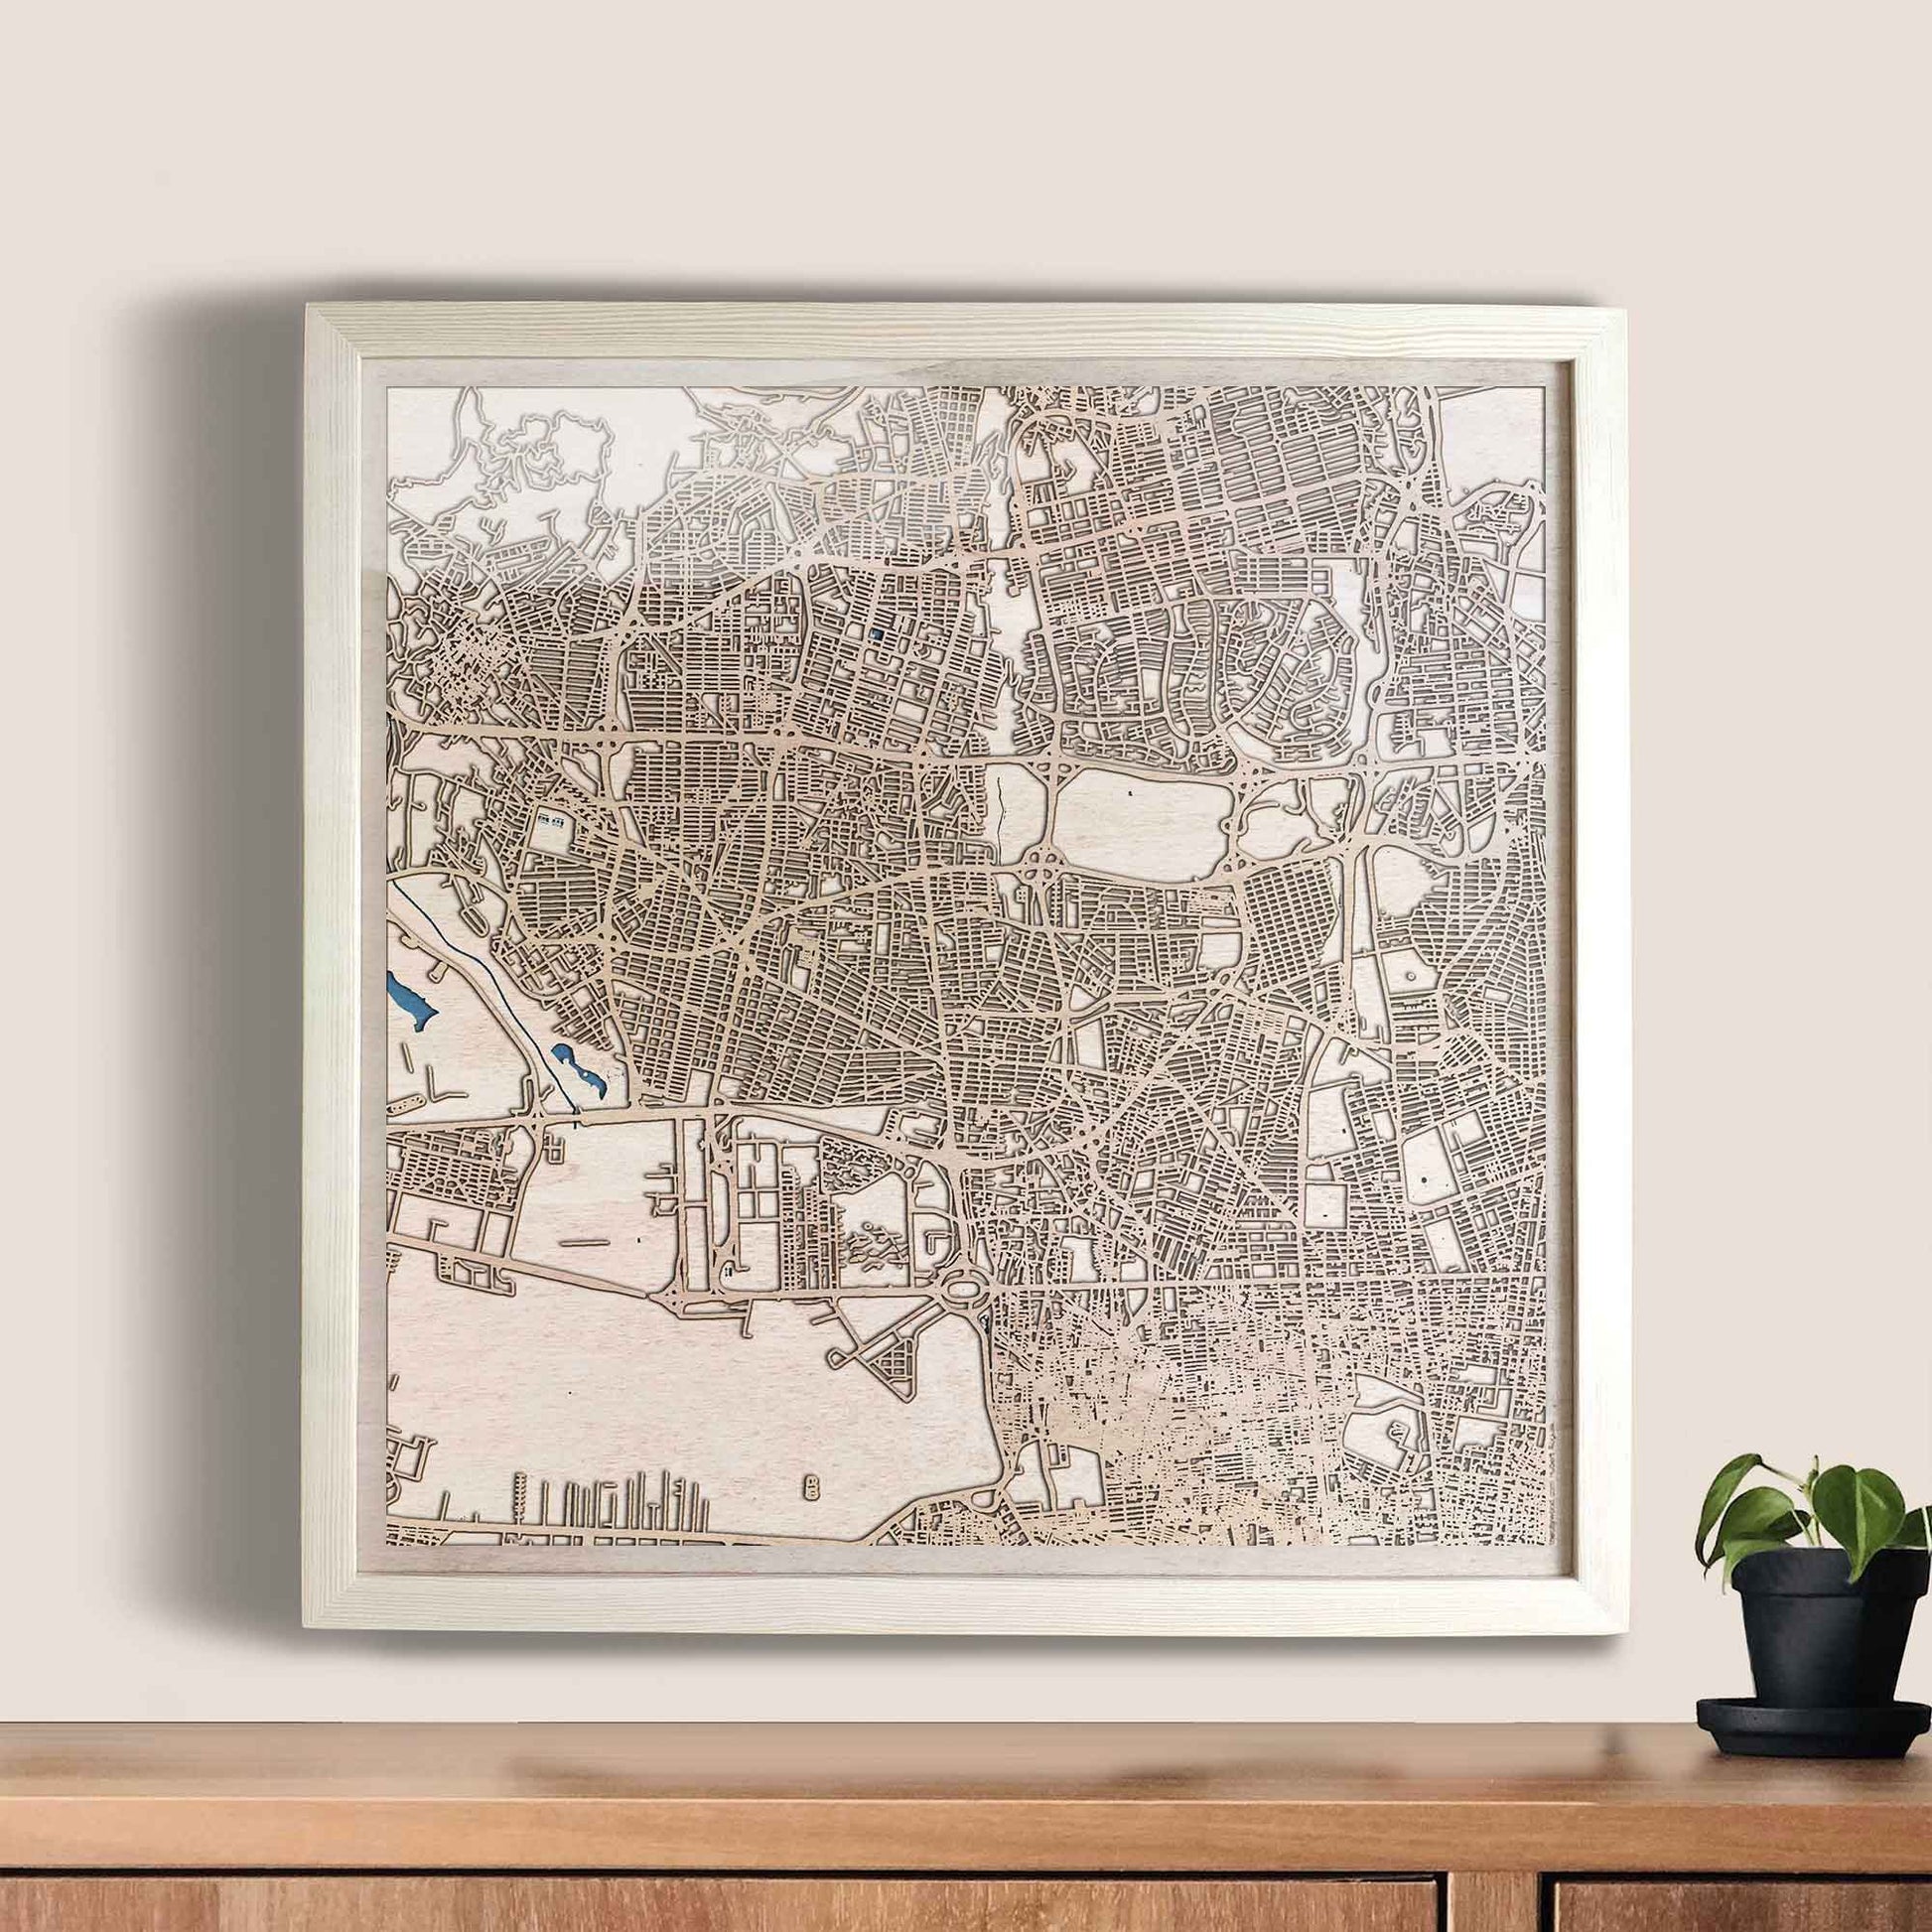 Teheran Wooden Map by CityWood - Custom Wood Map Art - Unique Laser Cut Engraved - Anniversary Gift